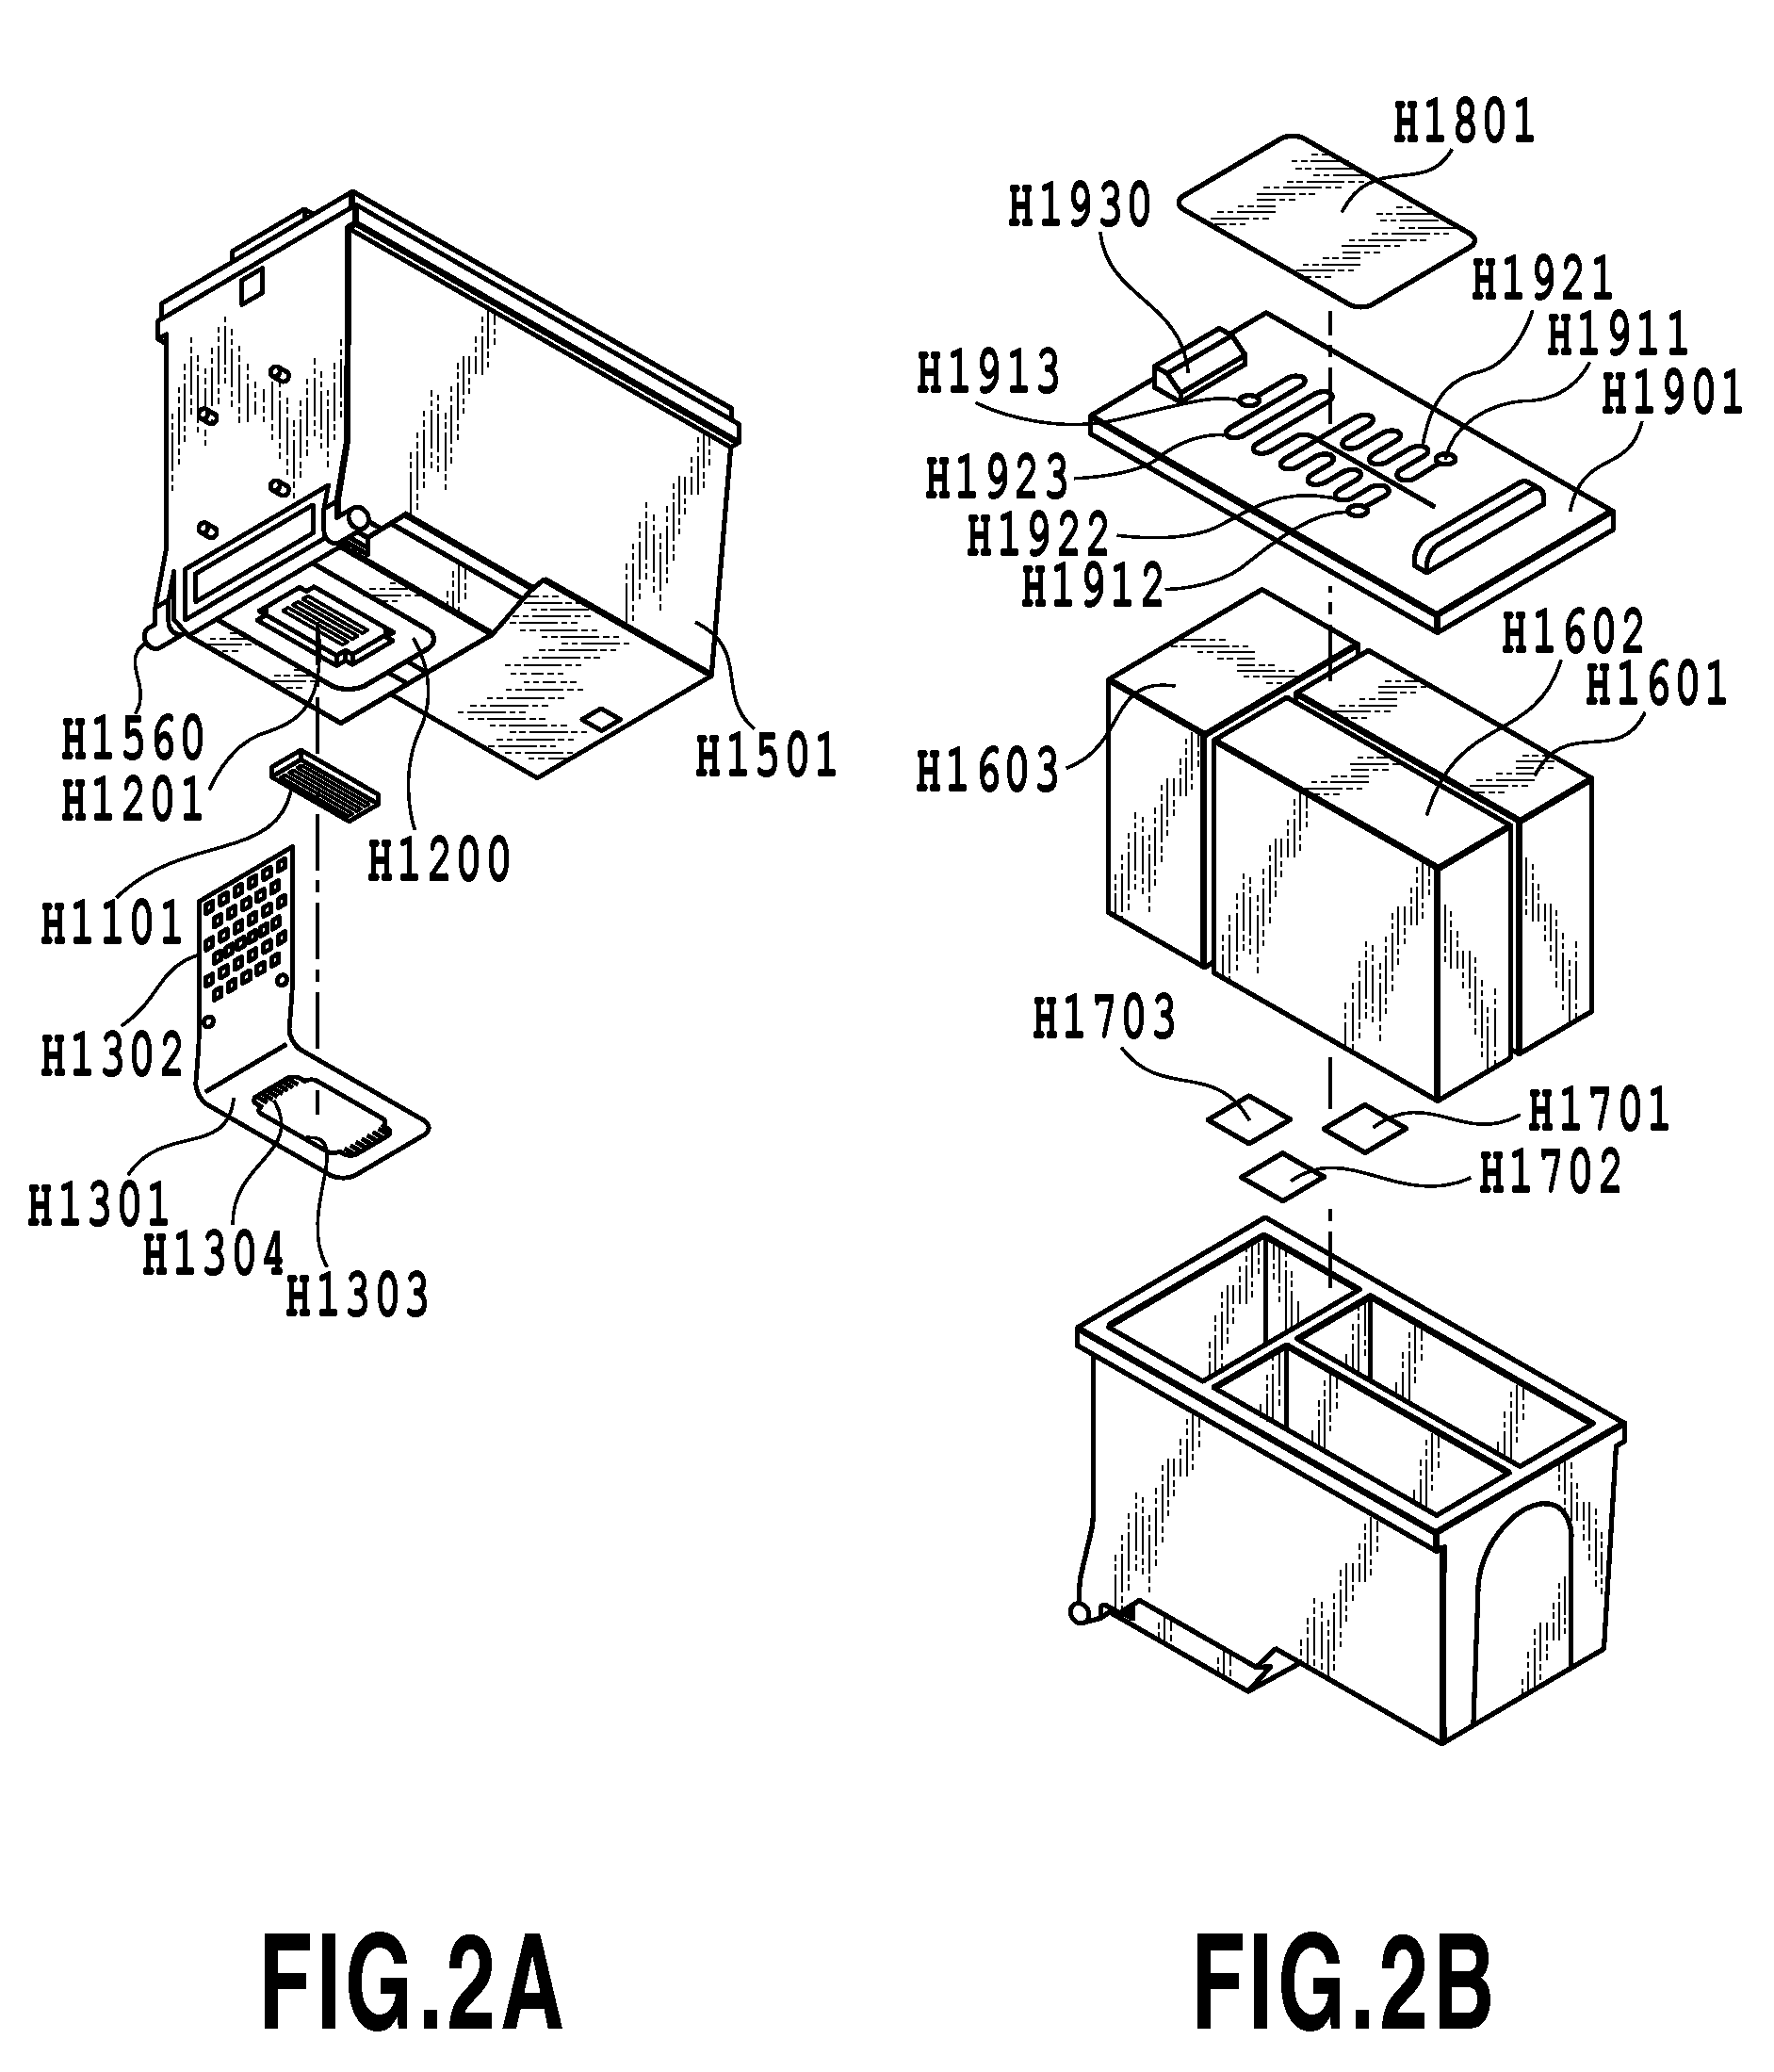 Inkjet print head and print element substrate for the same